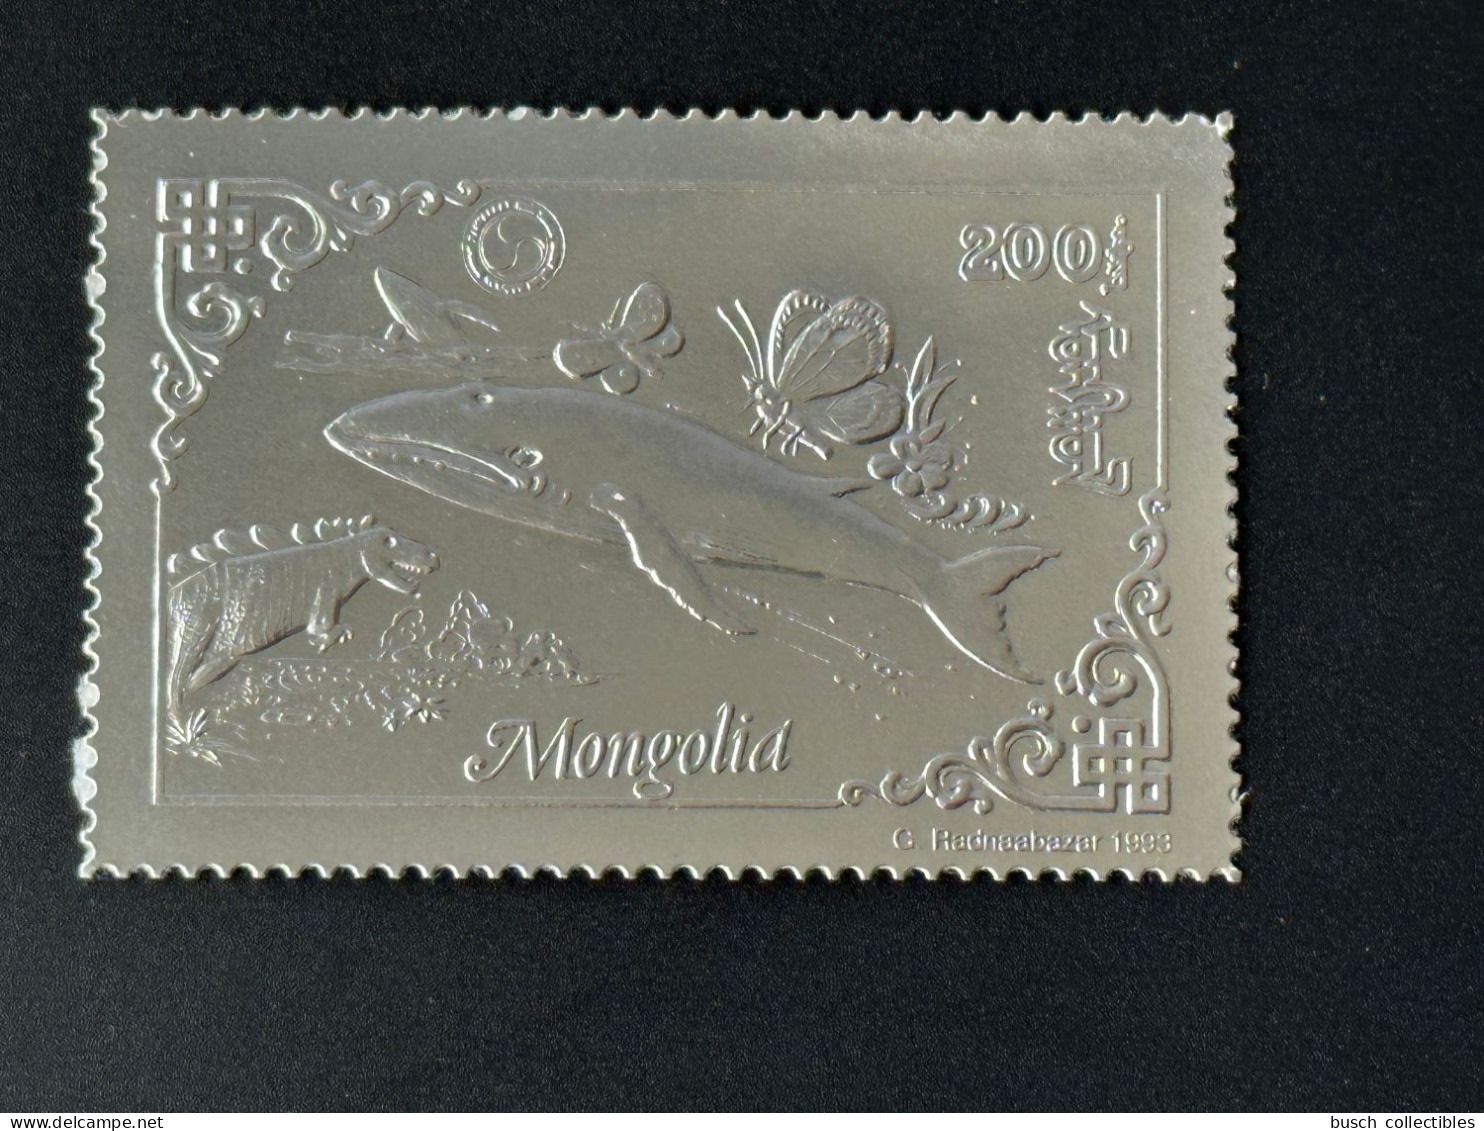 Mongolie Mongolia 1993 Mi. 2472 A Silver Argent Rotary Lions Dinosaur Dinosaure Dinosaurier Wal Whale Baleine Butterfly - Rotary, Lions Club